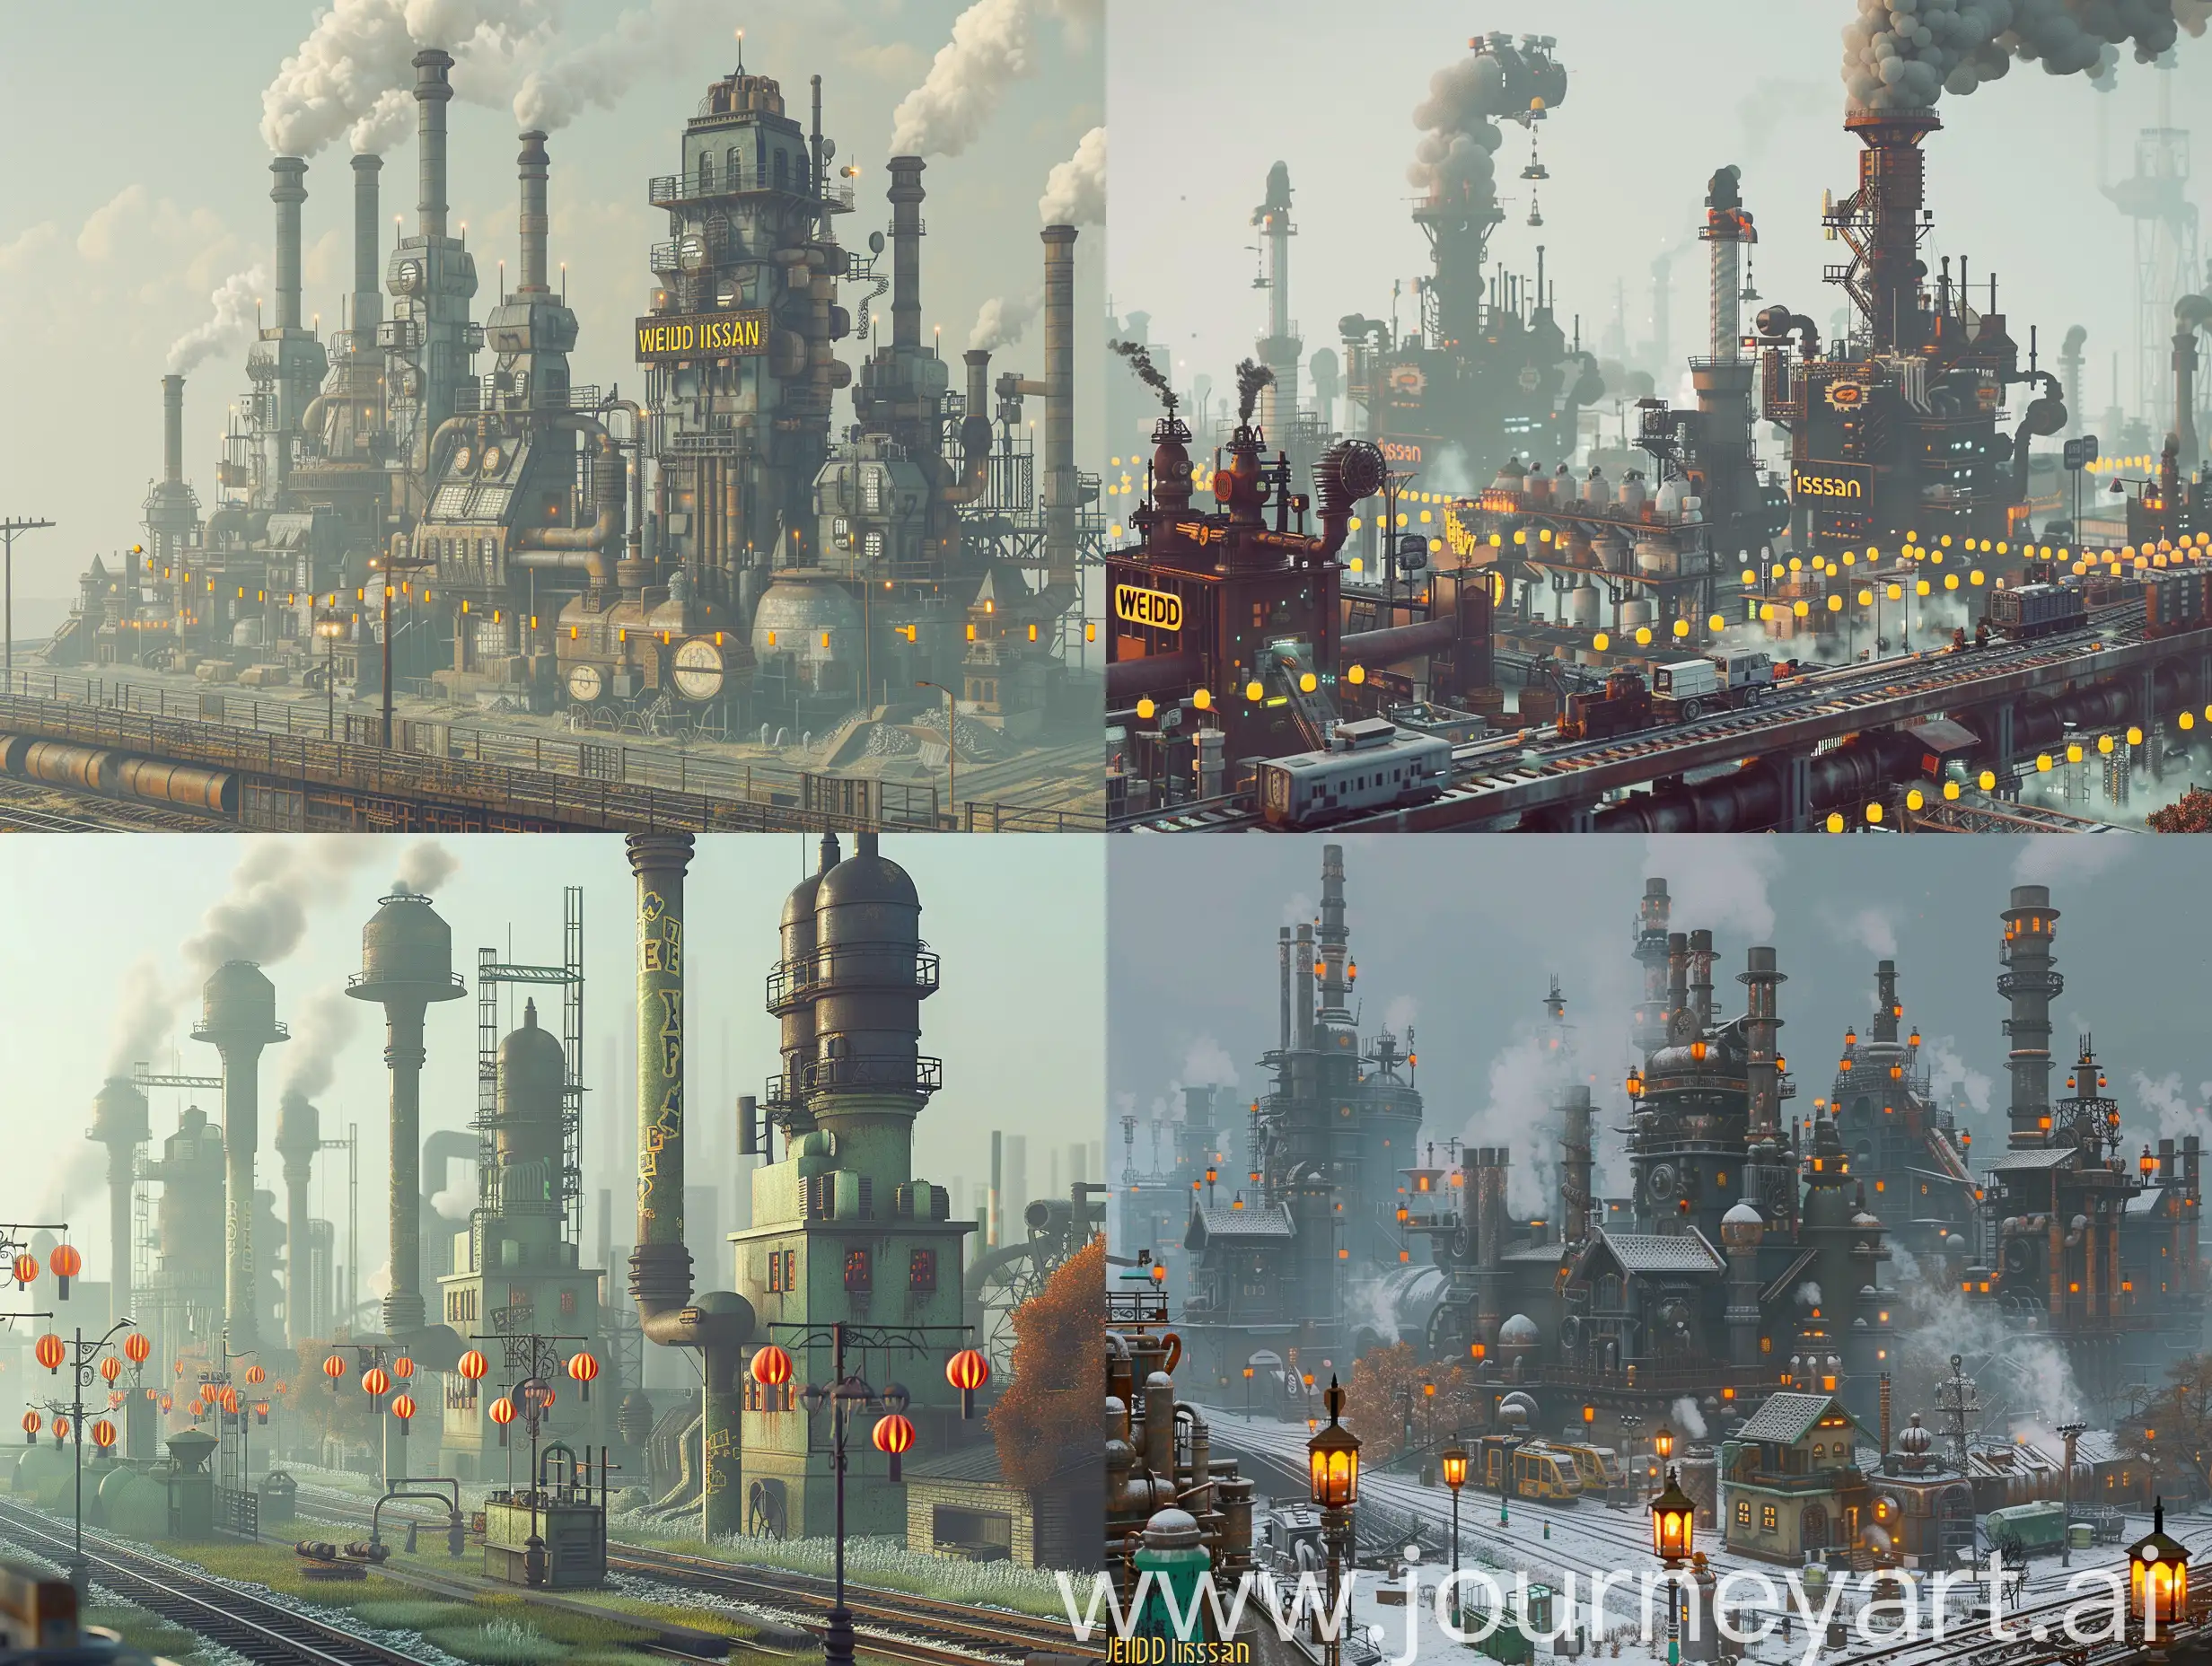 TEXT saying 'WEIRD INSAAN', clear visible title text, 4 dimensional futuristic city, old world, lanterns, photorealistic , isometric, digital art, smog, pollution, toxic waste, chimneys and railroads, 3 d render, octane render, volumetrics, by greg rutkowski